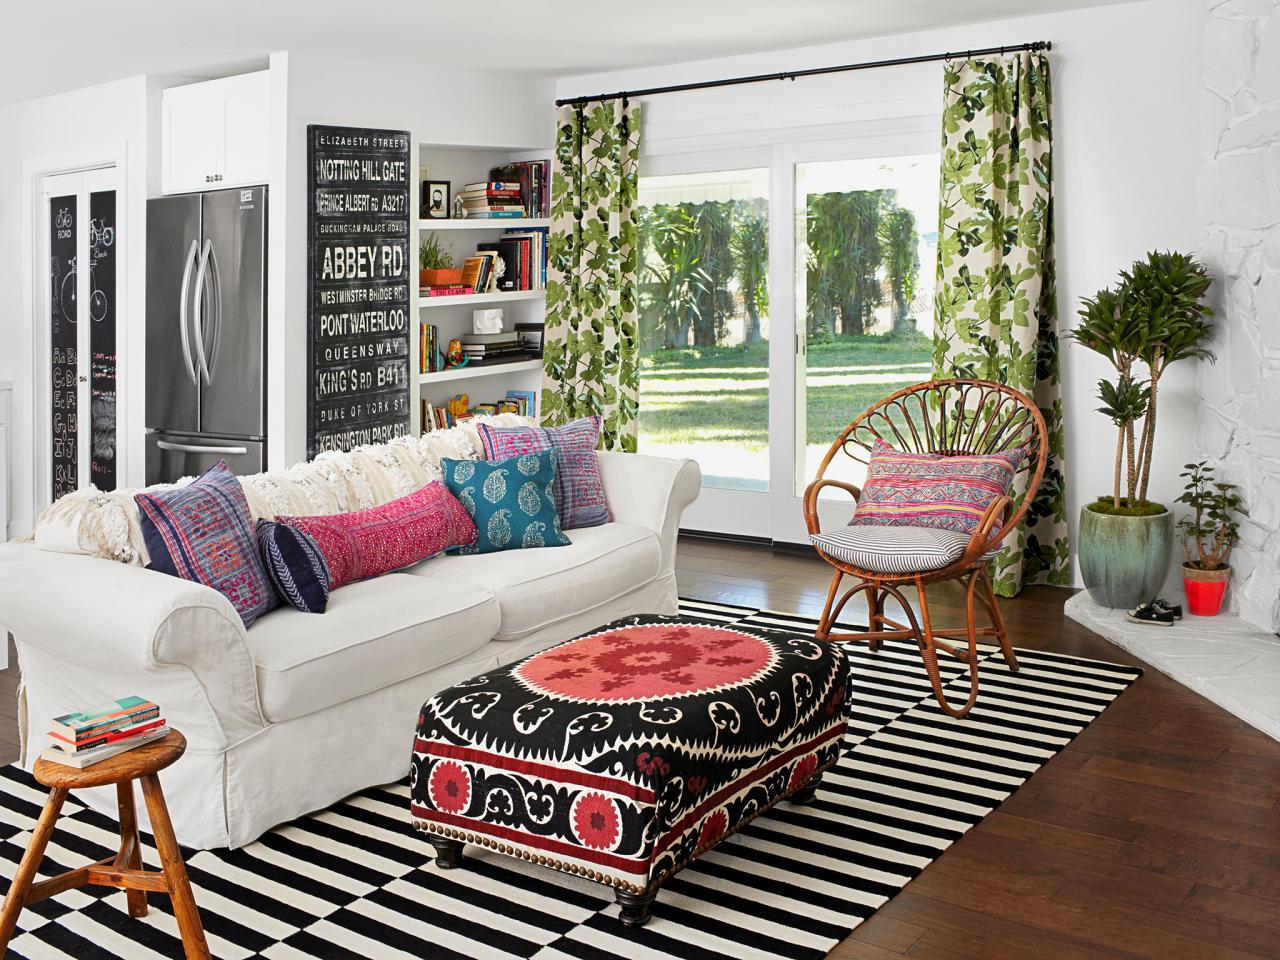 Striped-rug-brings-balance-to-a-colorful-living-room